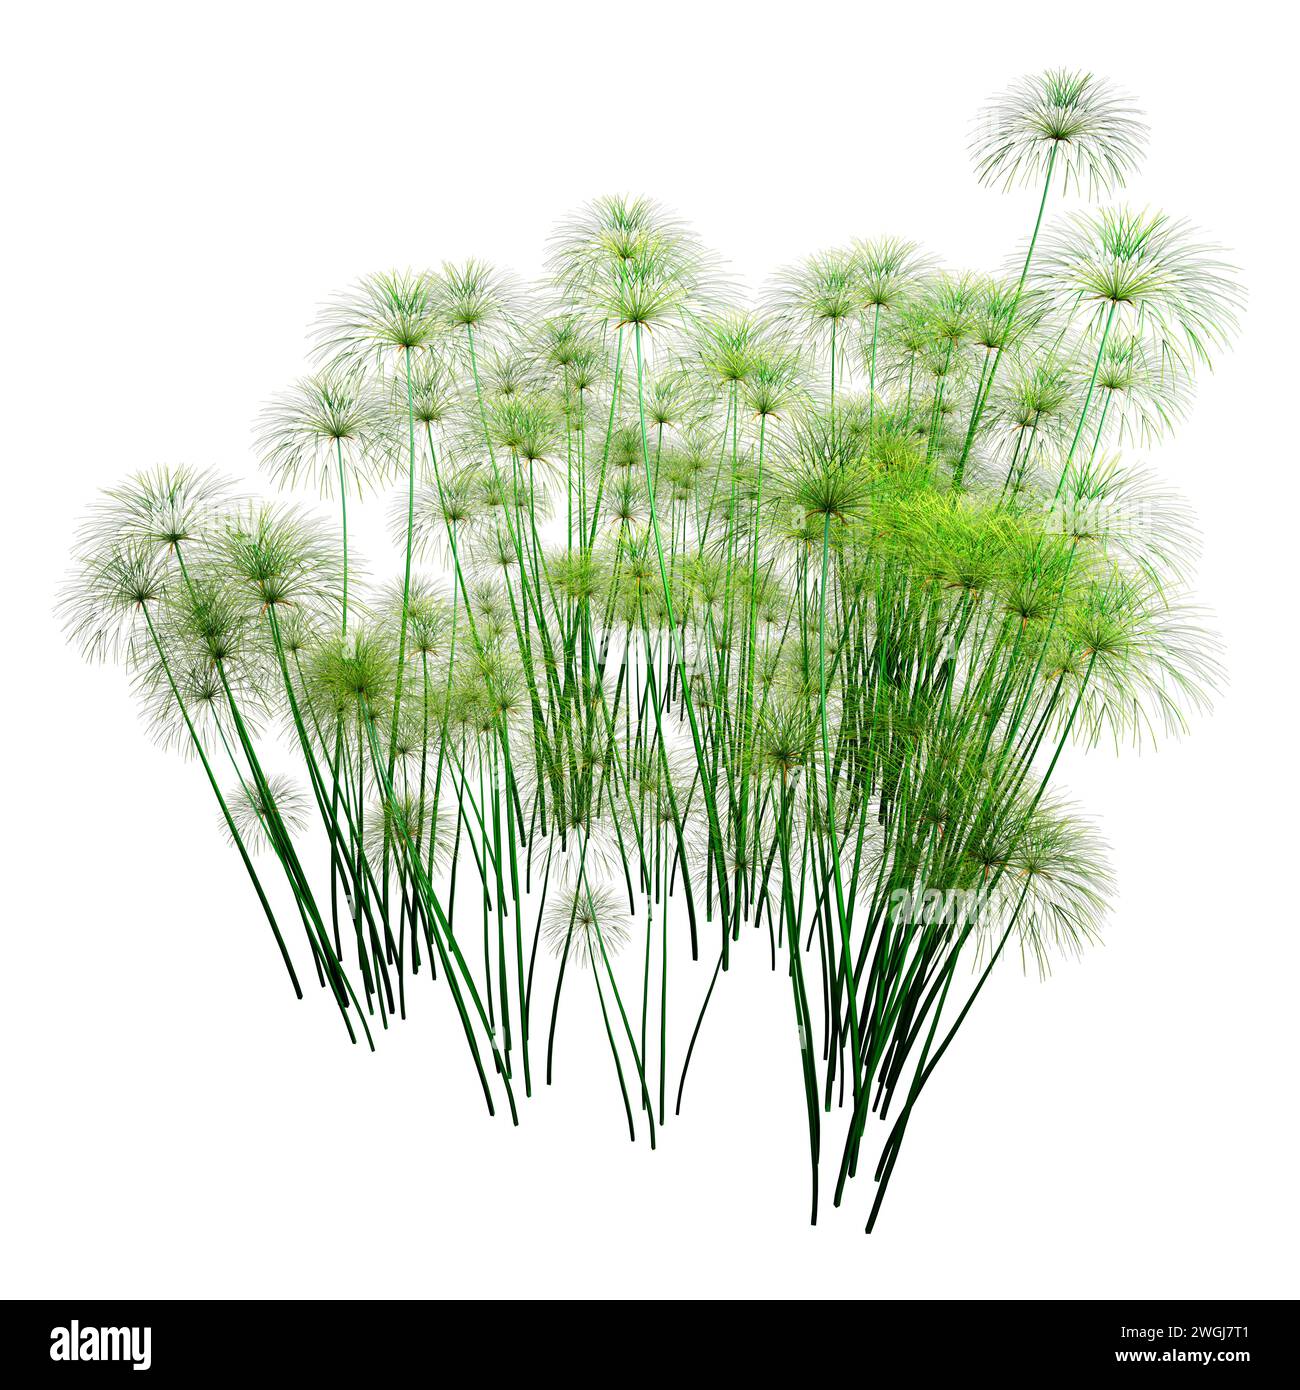 3D rendering of papyrus plants or Cyperus papyrus or Nile grass isolated on white background Stock Photo